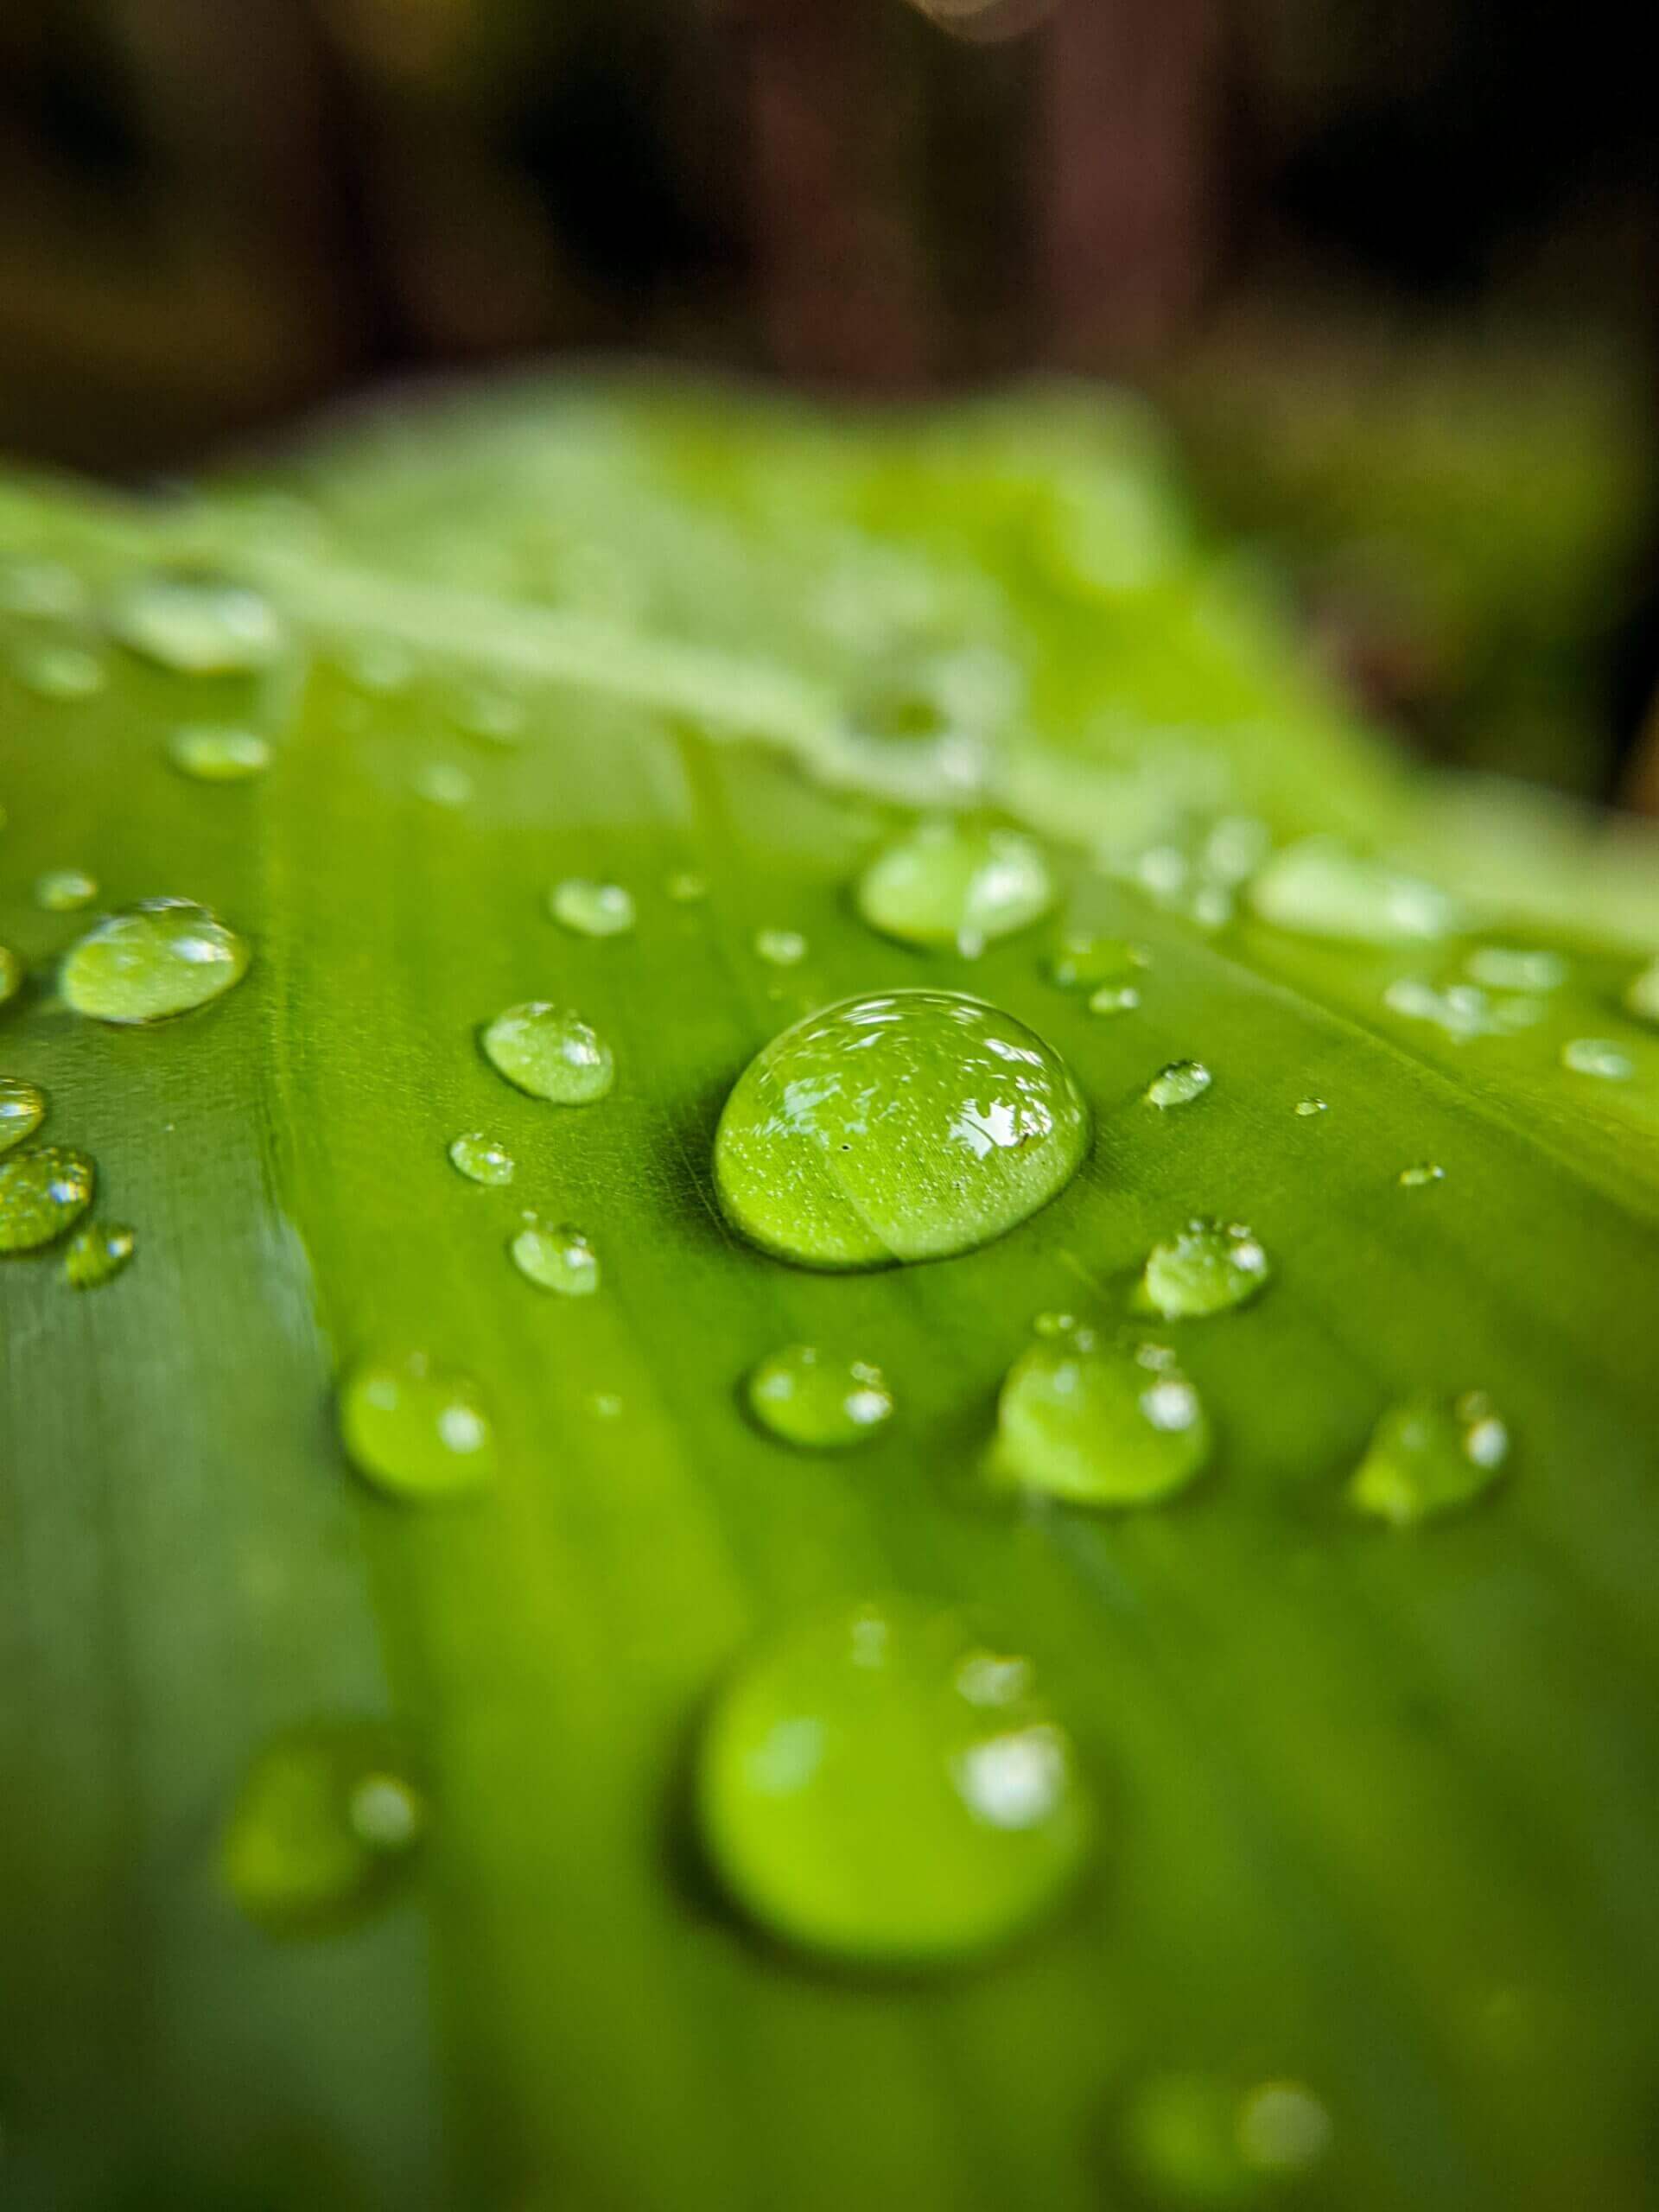 Some rainwater on a leaf.